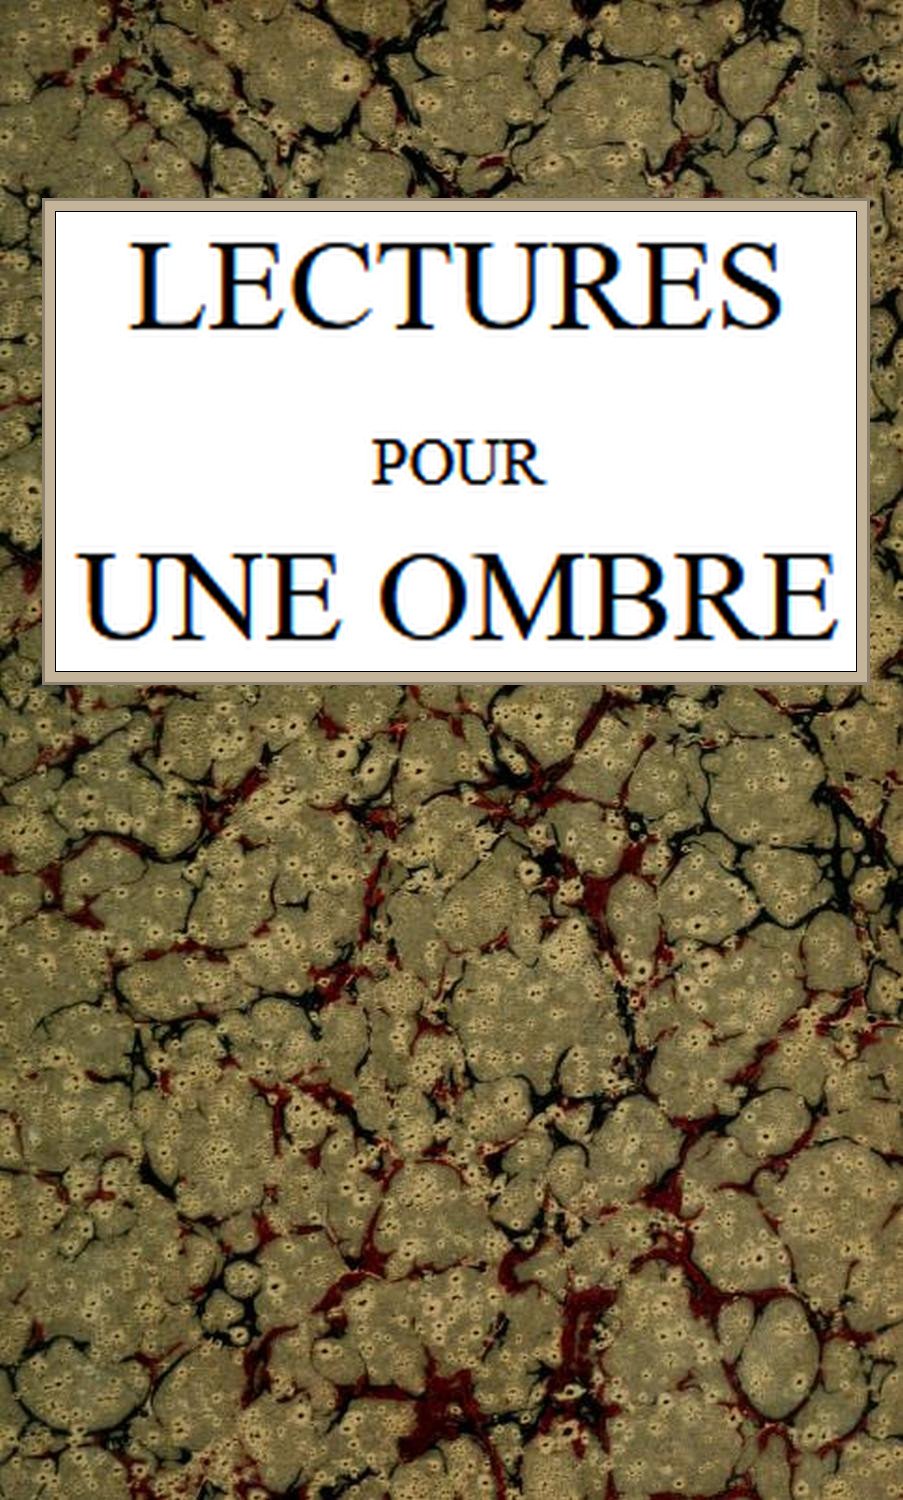 The Distributed Proofreaders Canada eBook of Lectures pour une ombre, par  Jean-Hippolyte Giraudoux.